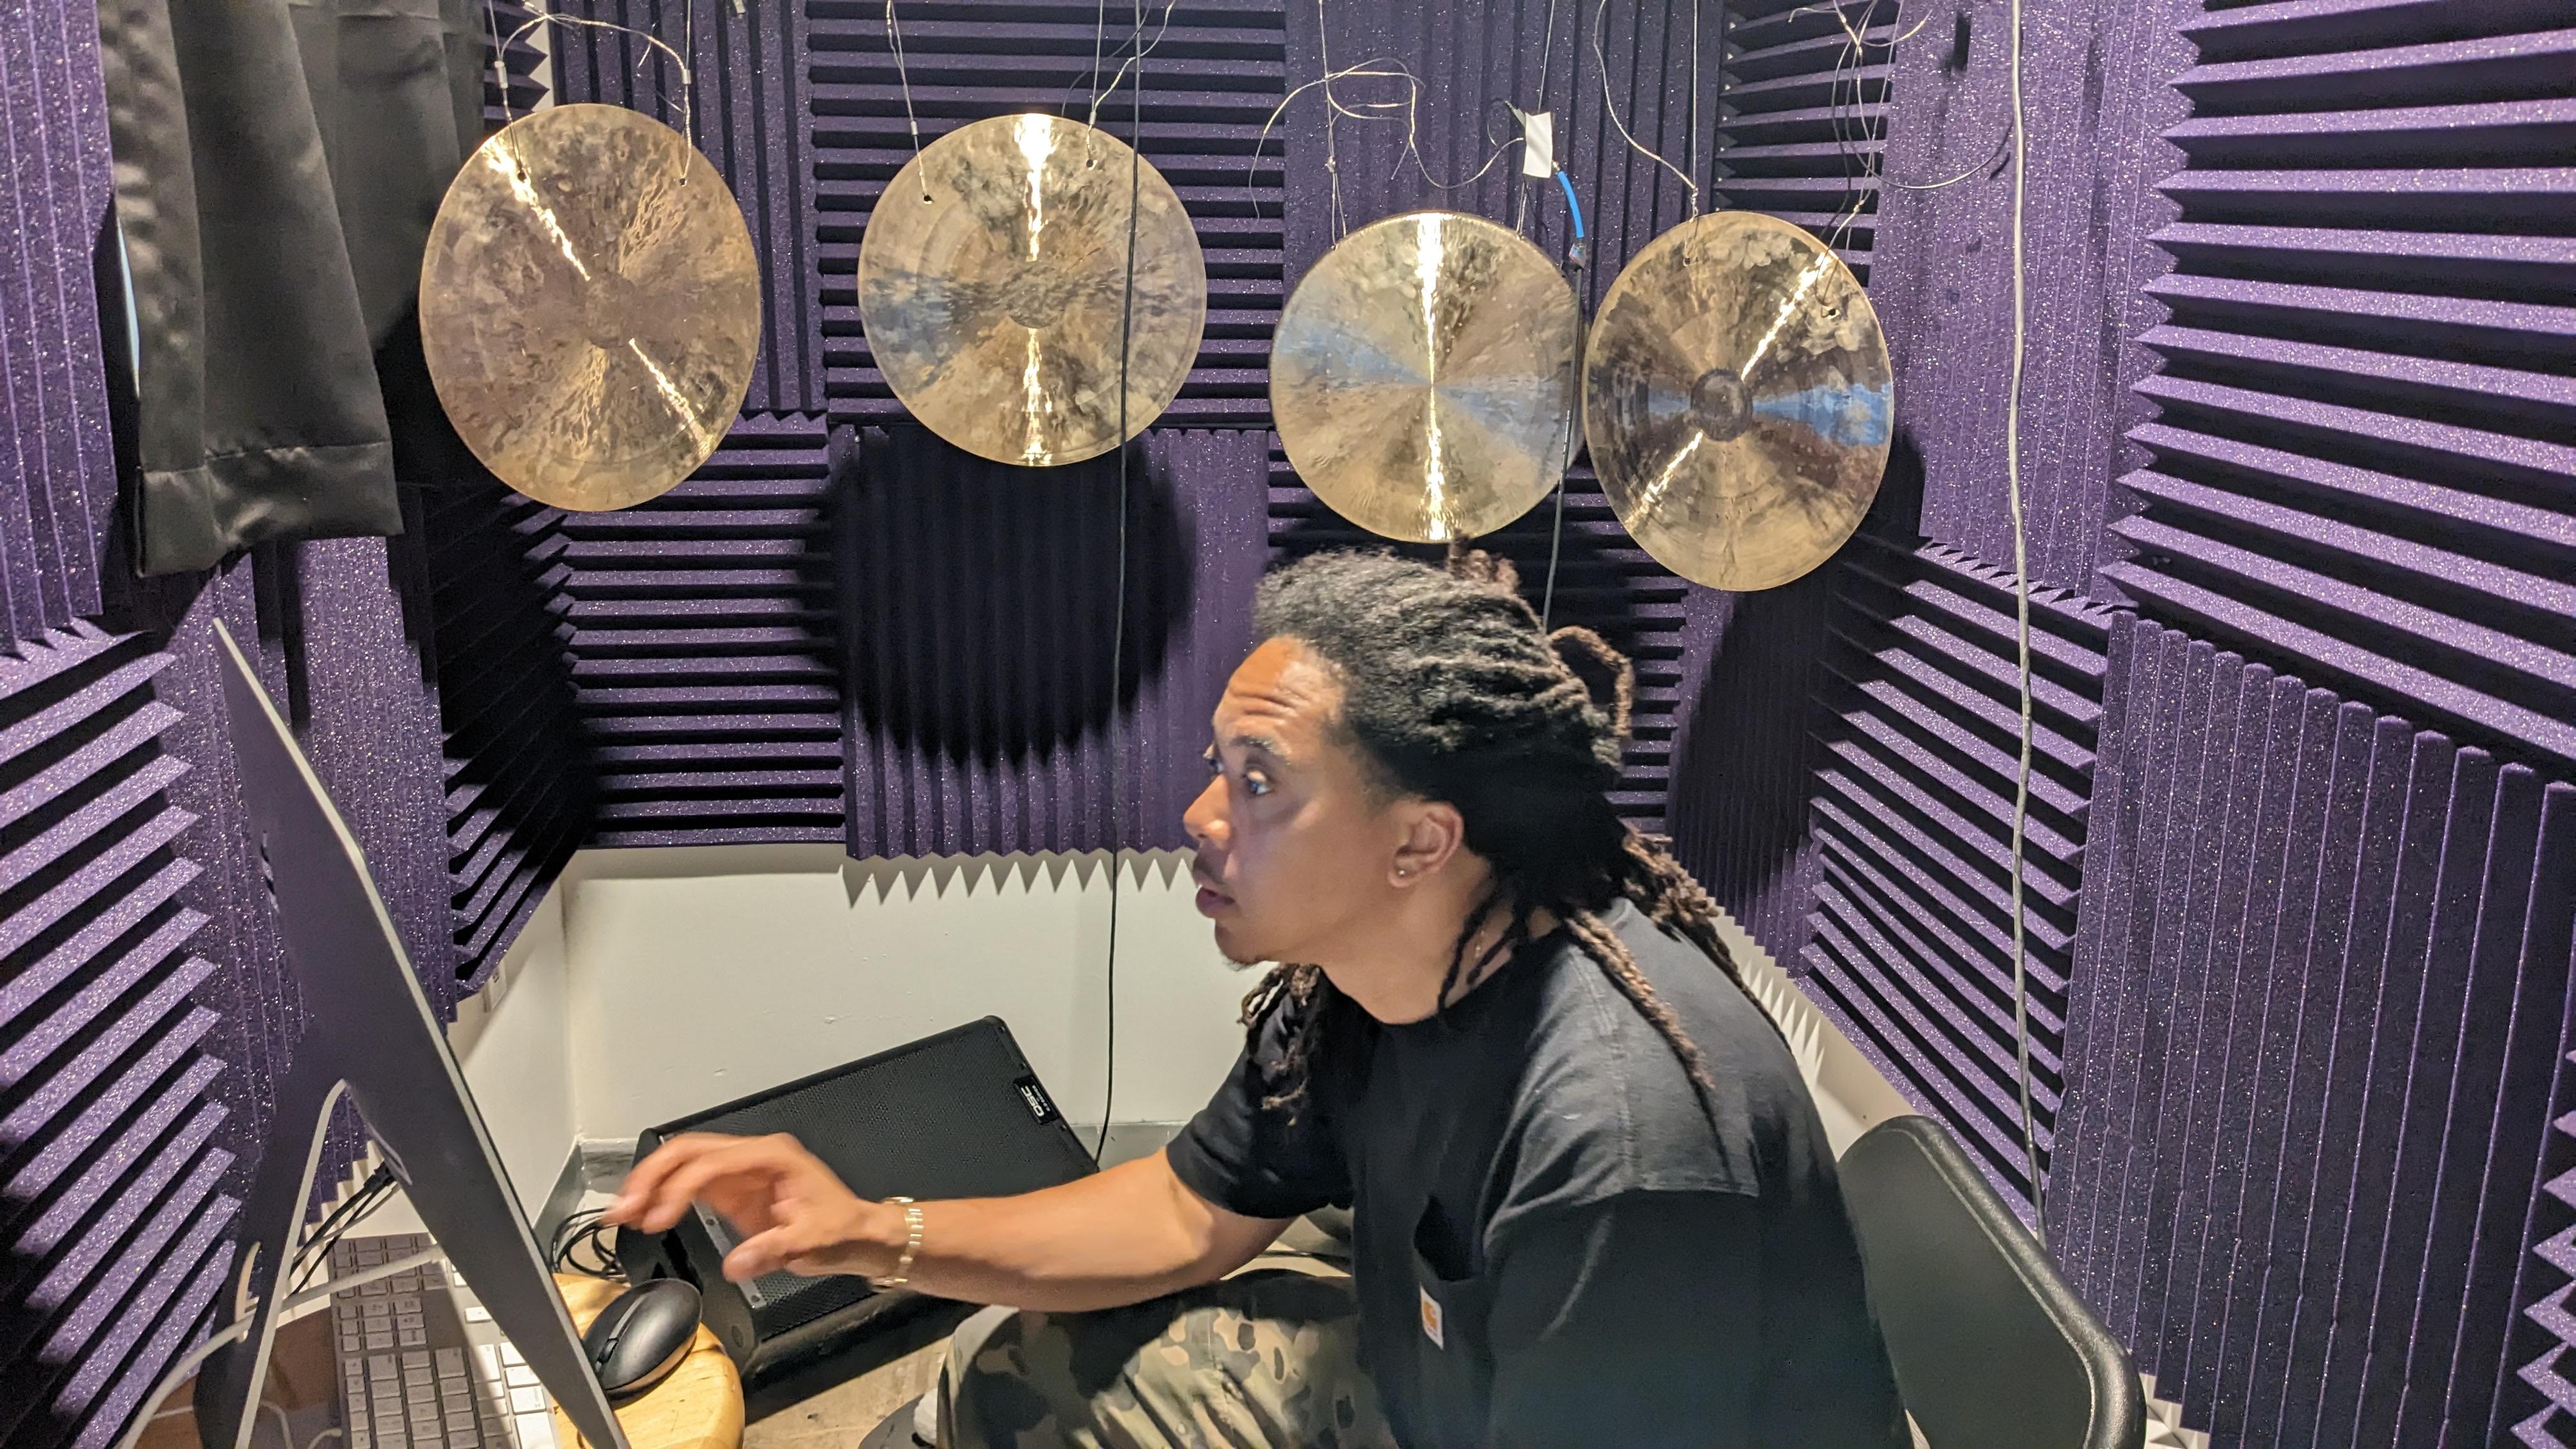 Photo by eo Studios. A person sits at a computer in a sound booth sound engineering with gongs hanging in the back.